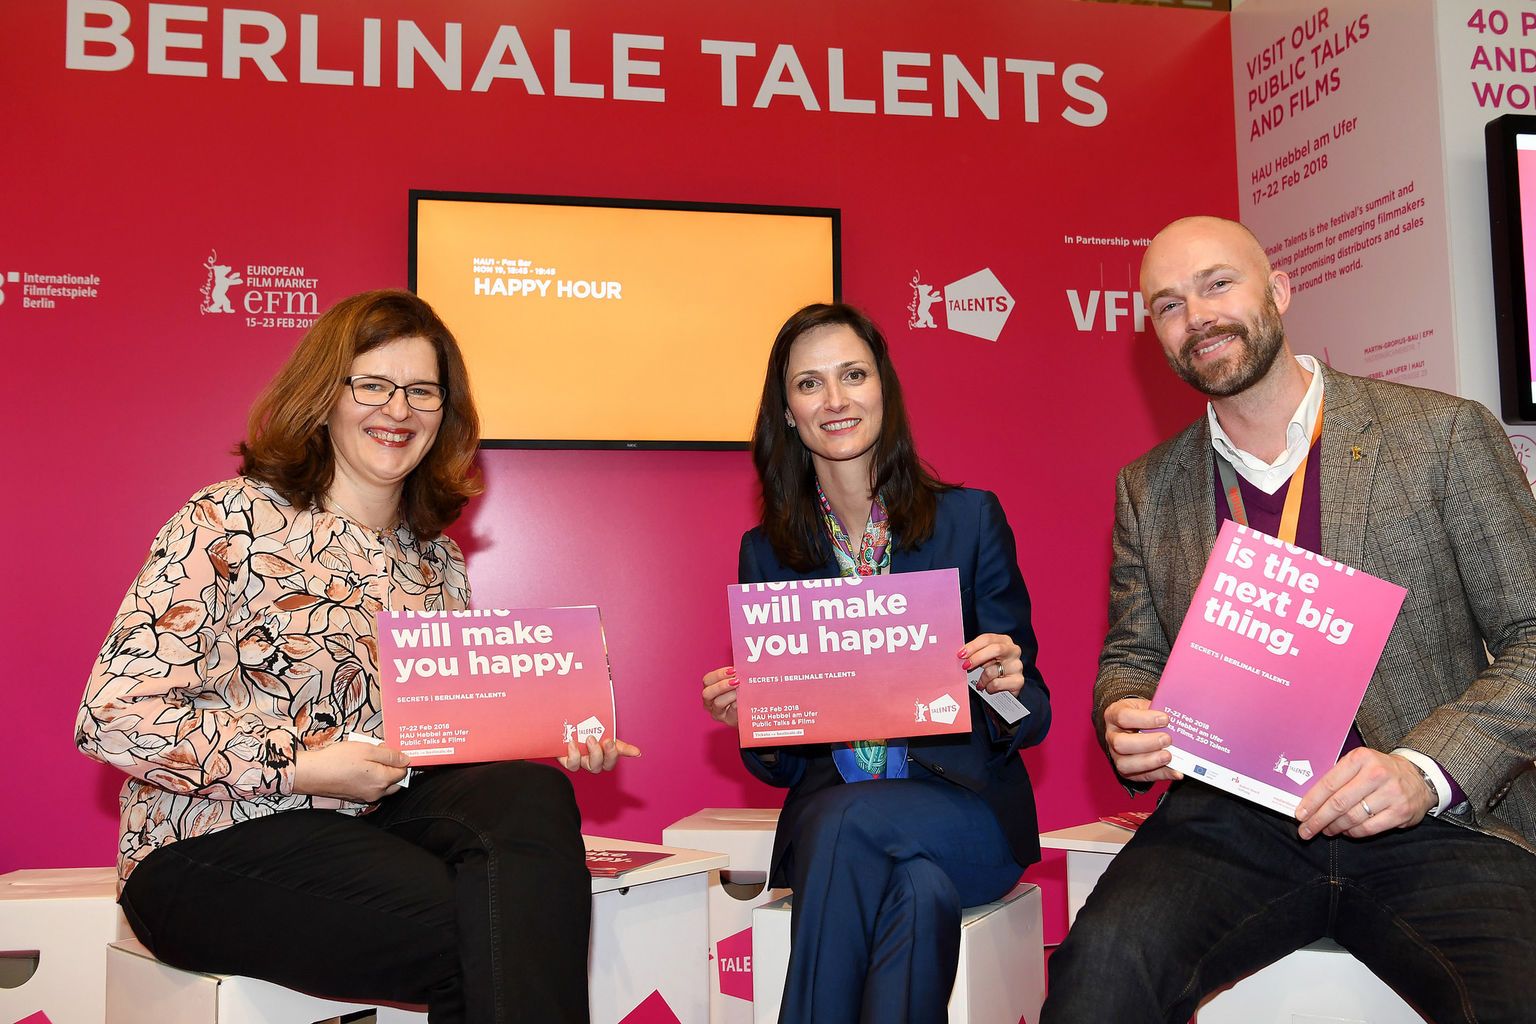 17-facts-about-berlinale-talents